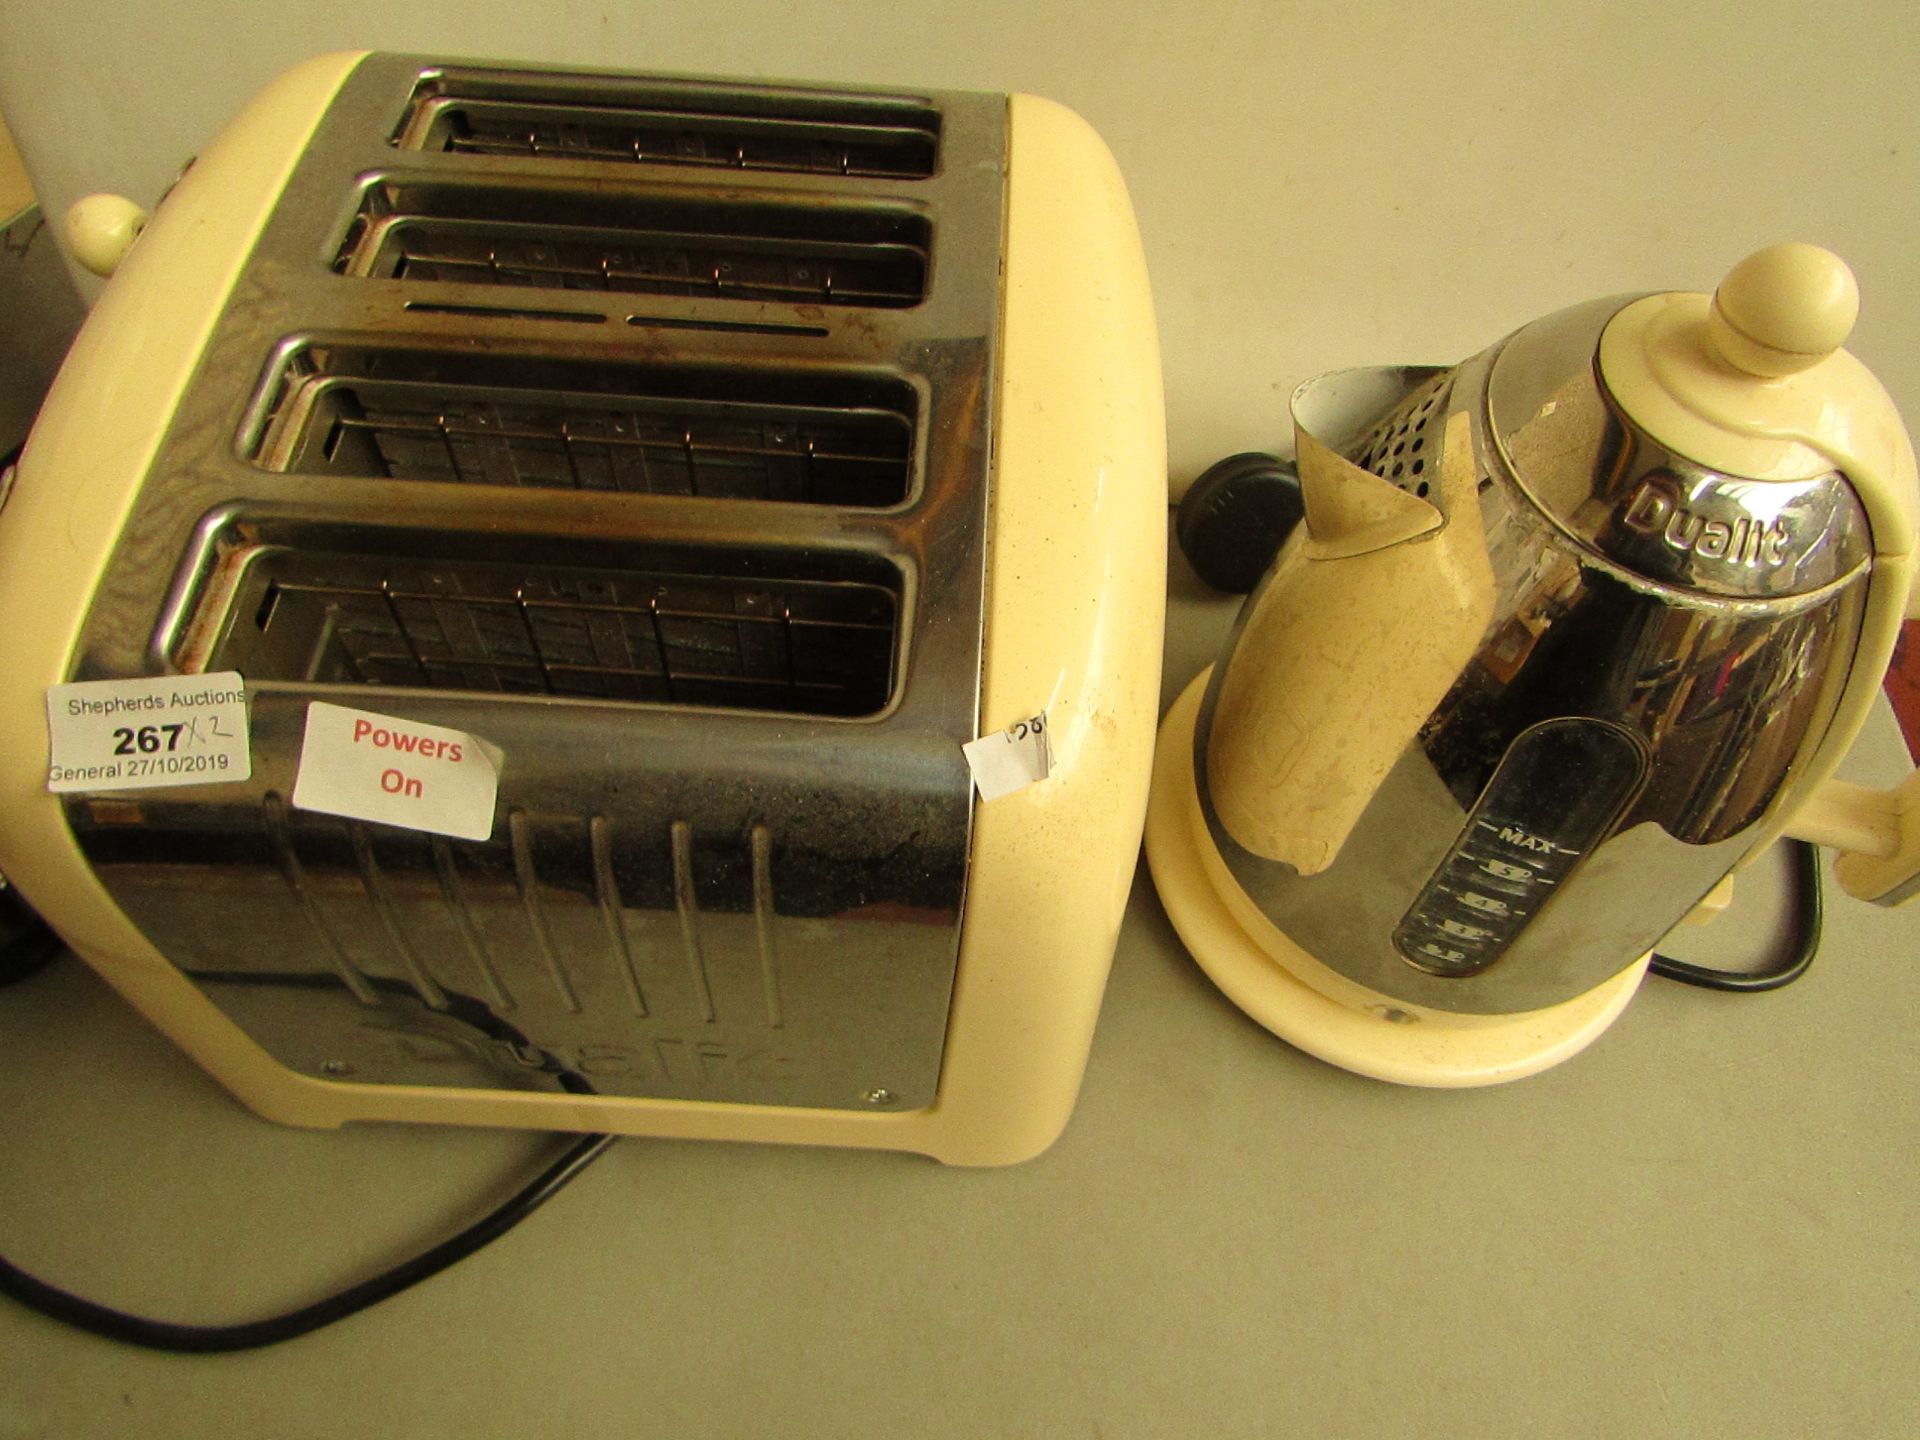 Dualit Kettle & Toaster. Both are tested working but have been used and need a clean